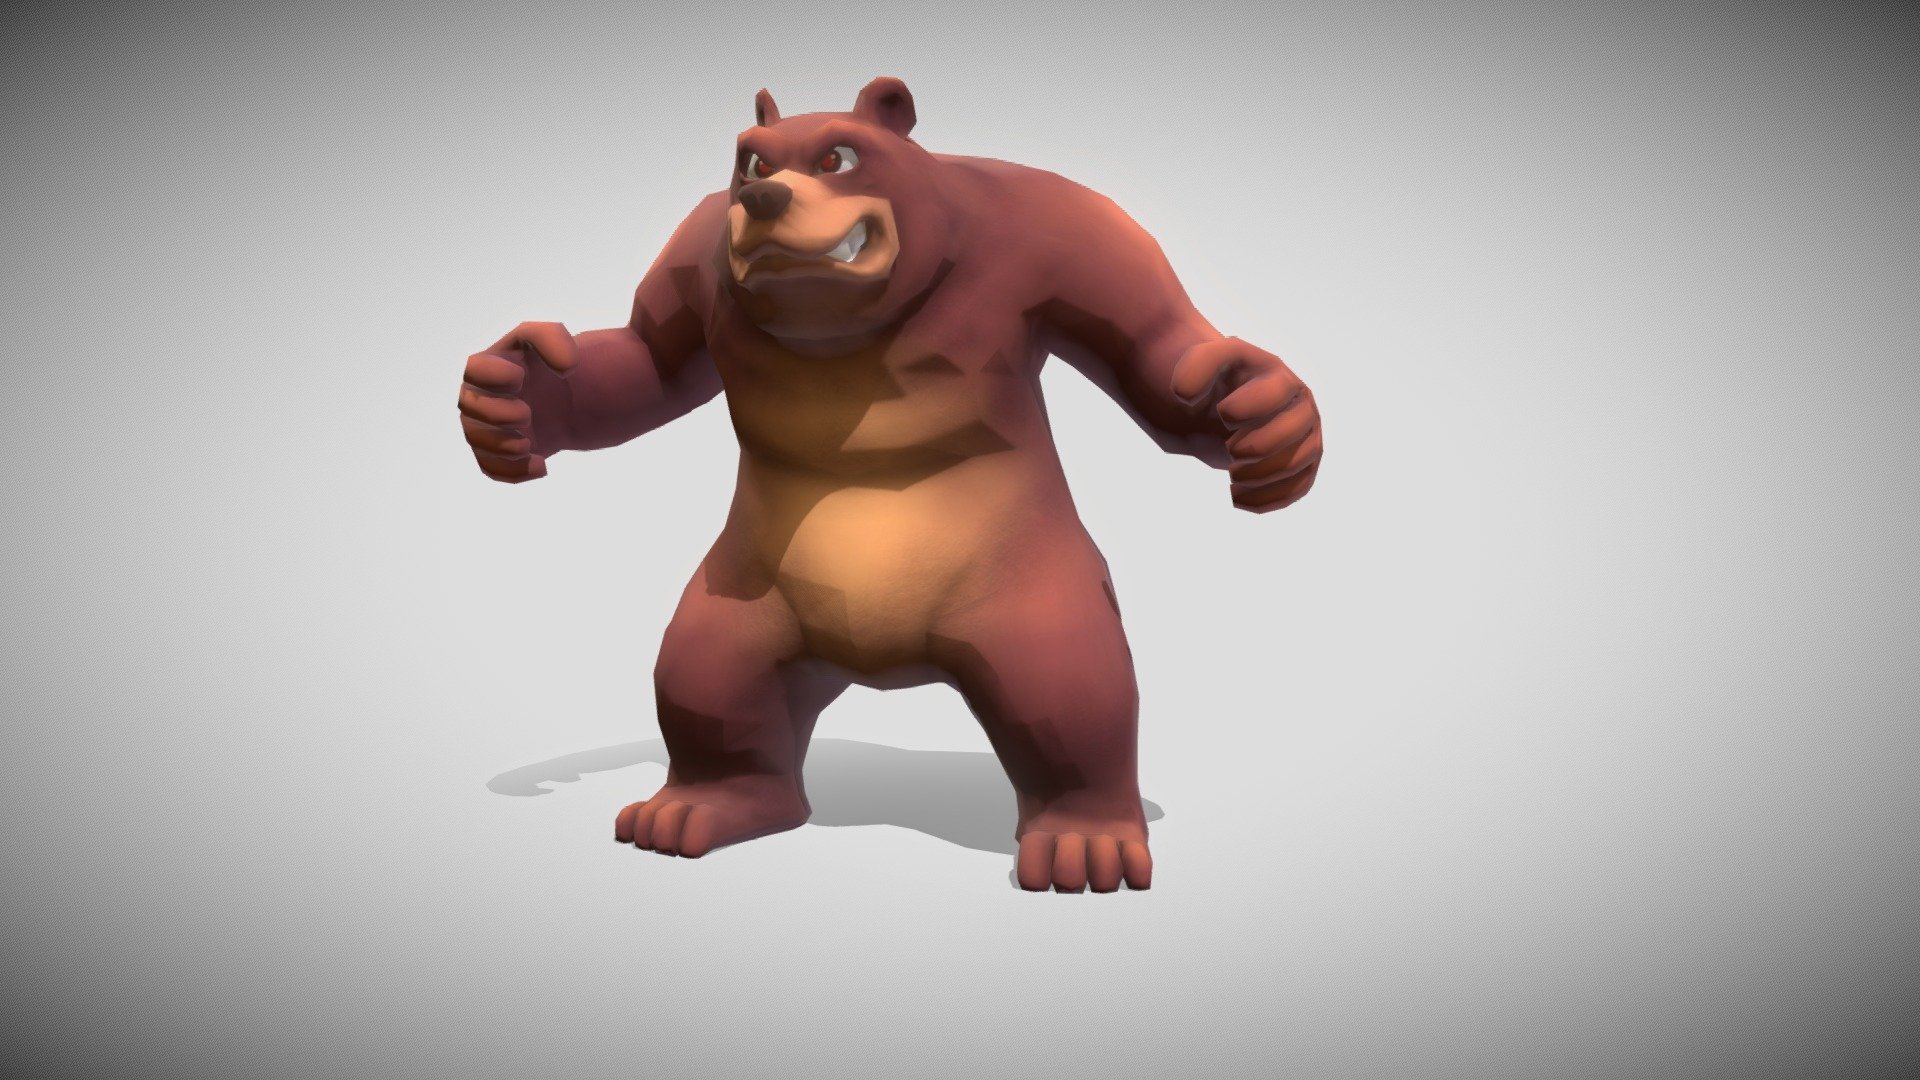 Stylized Bear 3D Model:
- Lowpoly (Tris: 2940 - Verts: 1518)
- Game ready with Unity Package, optimized for VR/AR apps
- Texture Maps includes: Basecolor, Normal
- Model is created in Maya, other files supported includes: Blender, FBX, Glb/Gltf, Unity

9 animations:
- 20-50: idle
- 60-120: comboAttack
- 130-170: howl
- 180-200: bite
- 210-230: clawAttack
- 240-270: walk
- 280-294: run
- 300-310: getHit
- 320-360: die - Lowpoly Stylized Bear Rigged and Animated - Buy Royalty Free 3D model by Dzung Dinh (@hugechimera) 3d model